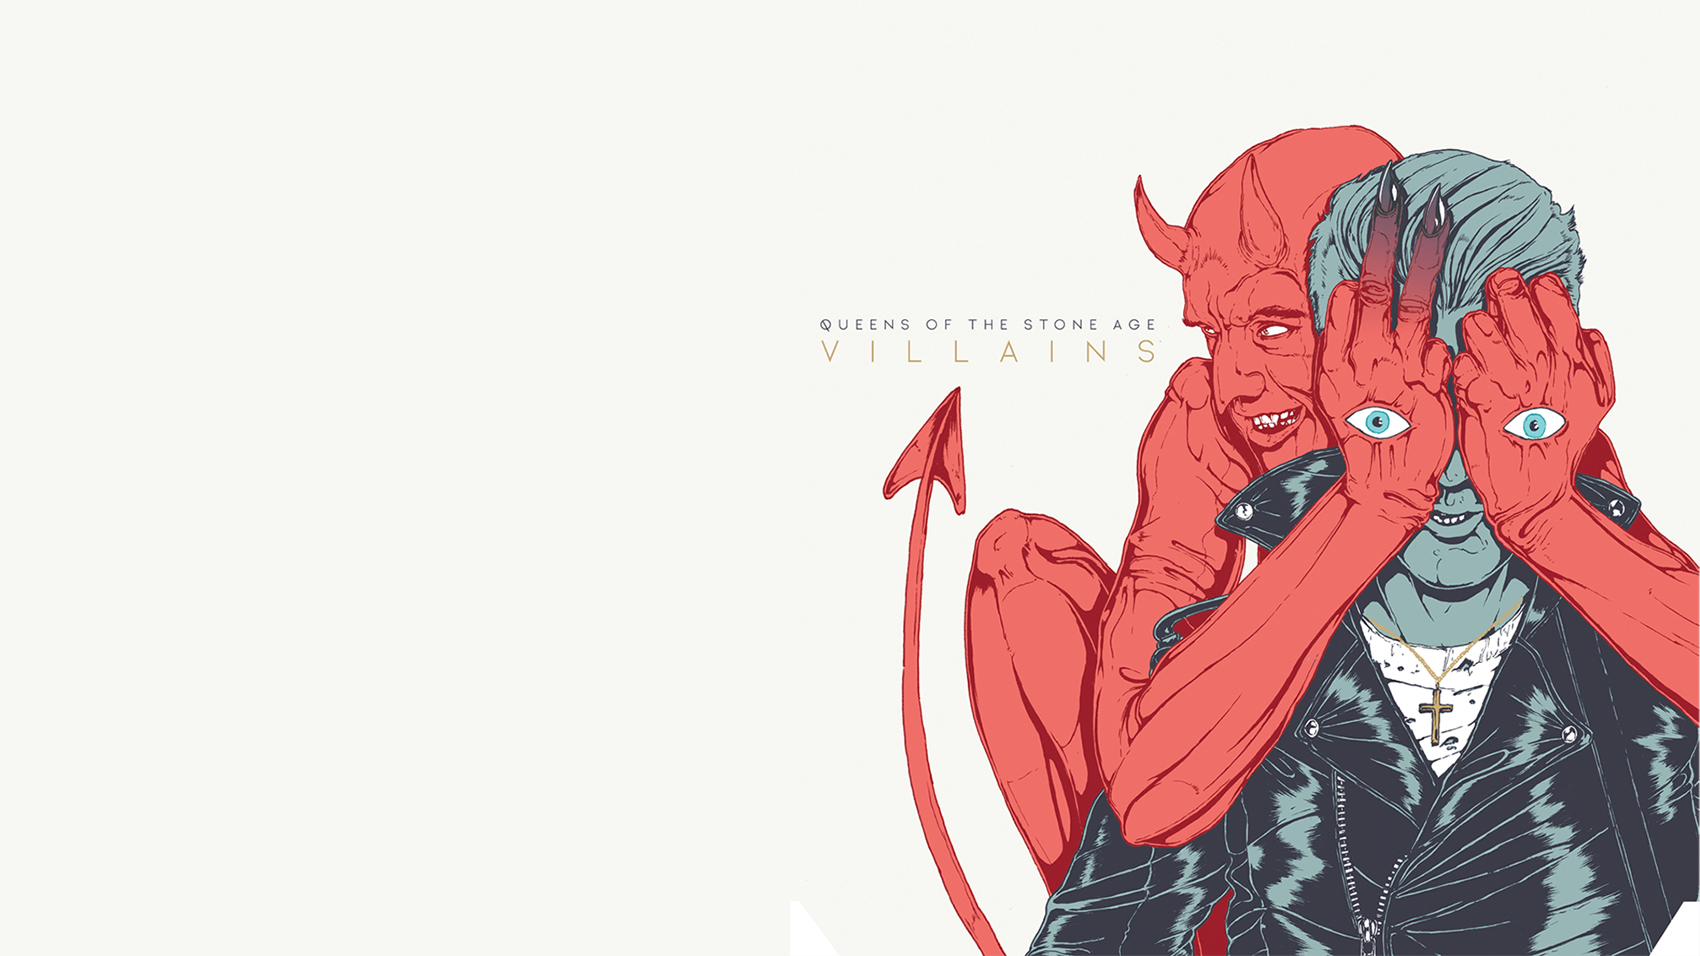 Queens of the Stone Age Villains album cover.